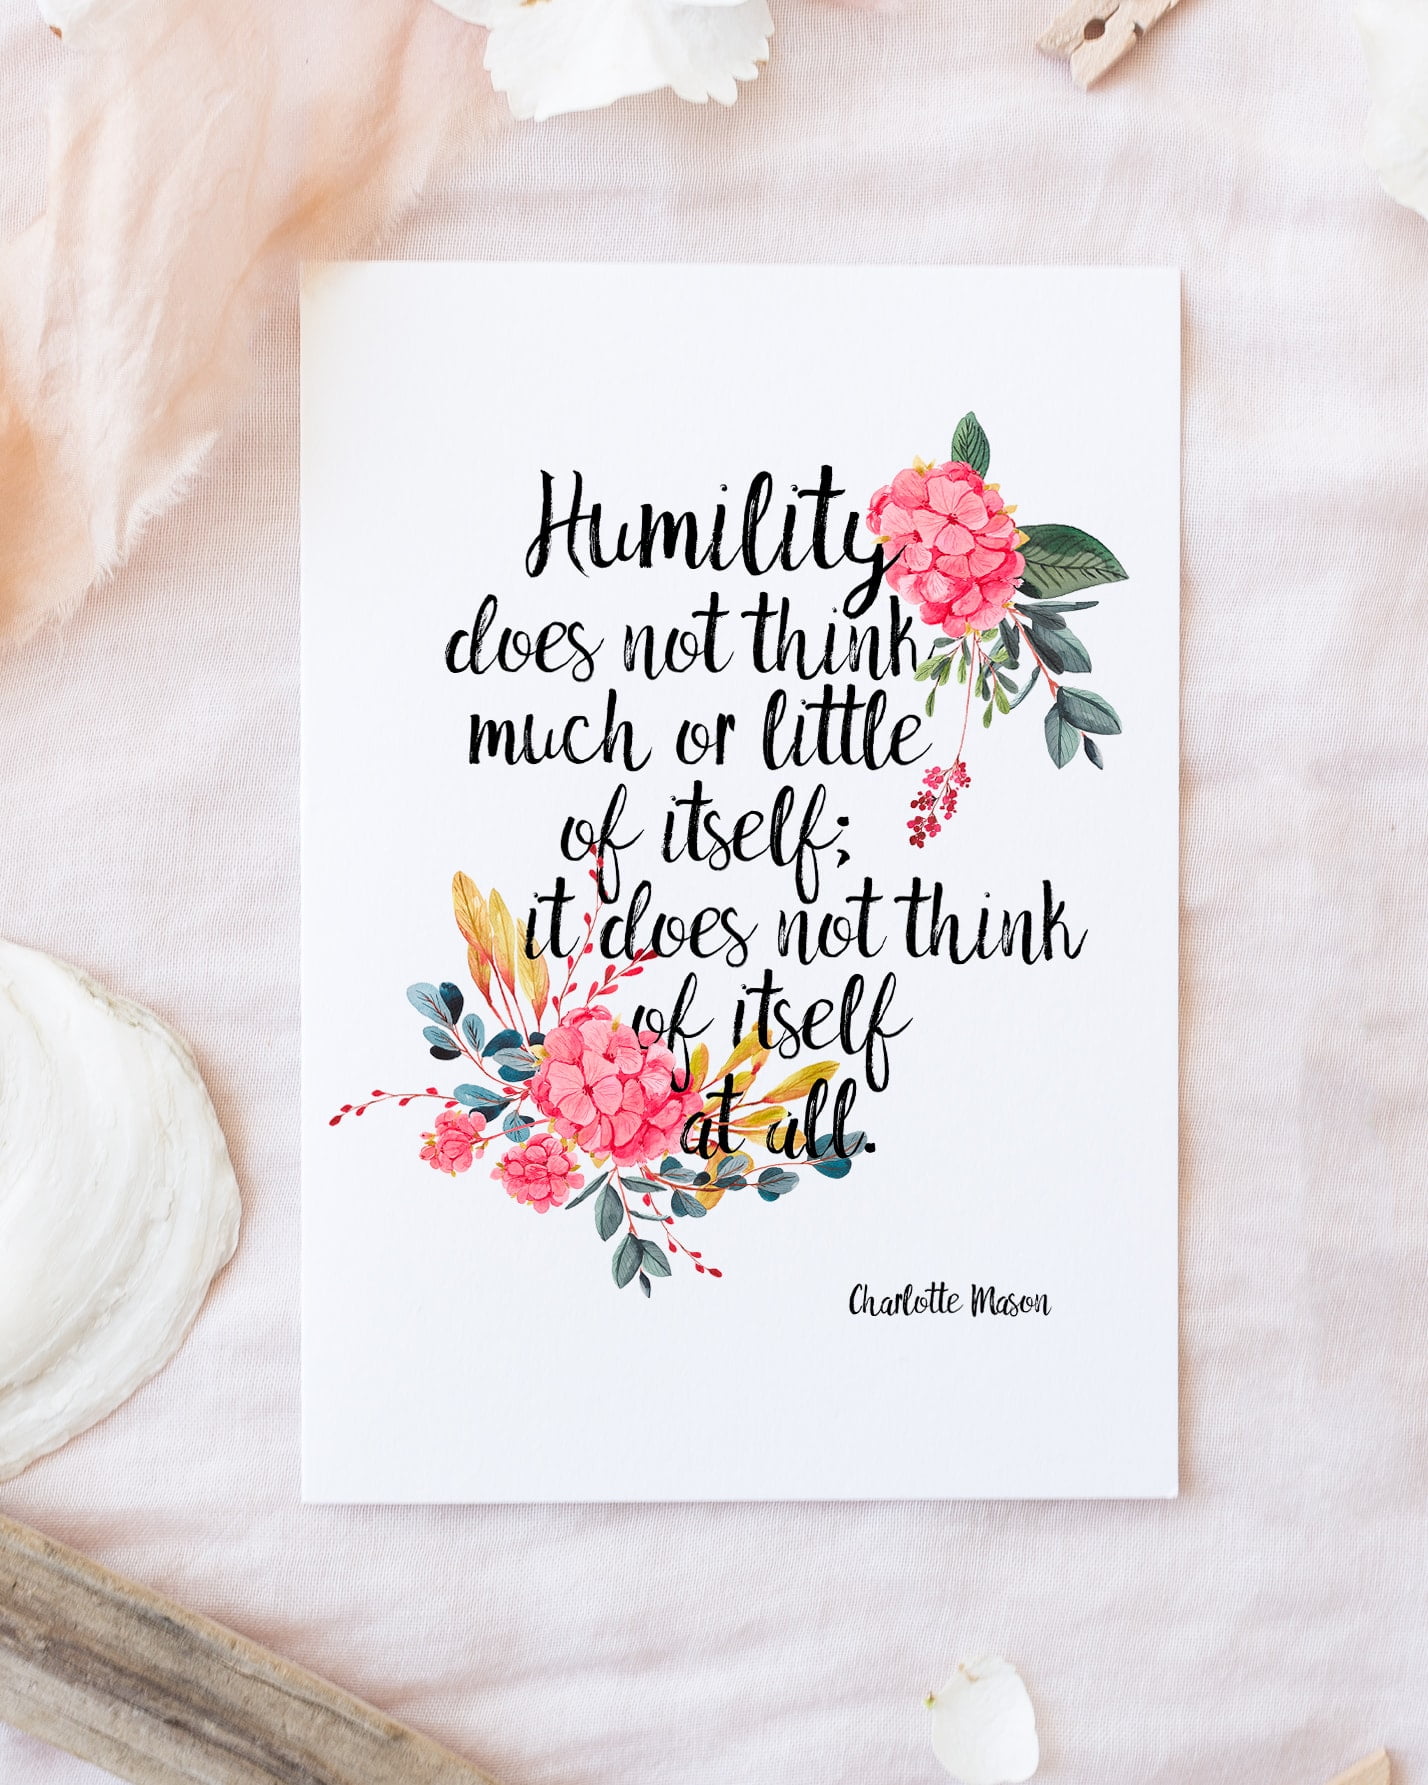 charlotte-mason-humility-does-not-think-much-or-little-of-itself